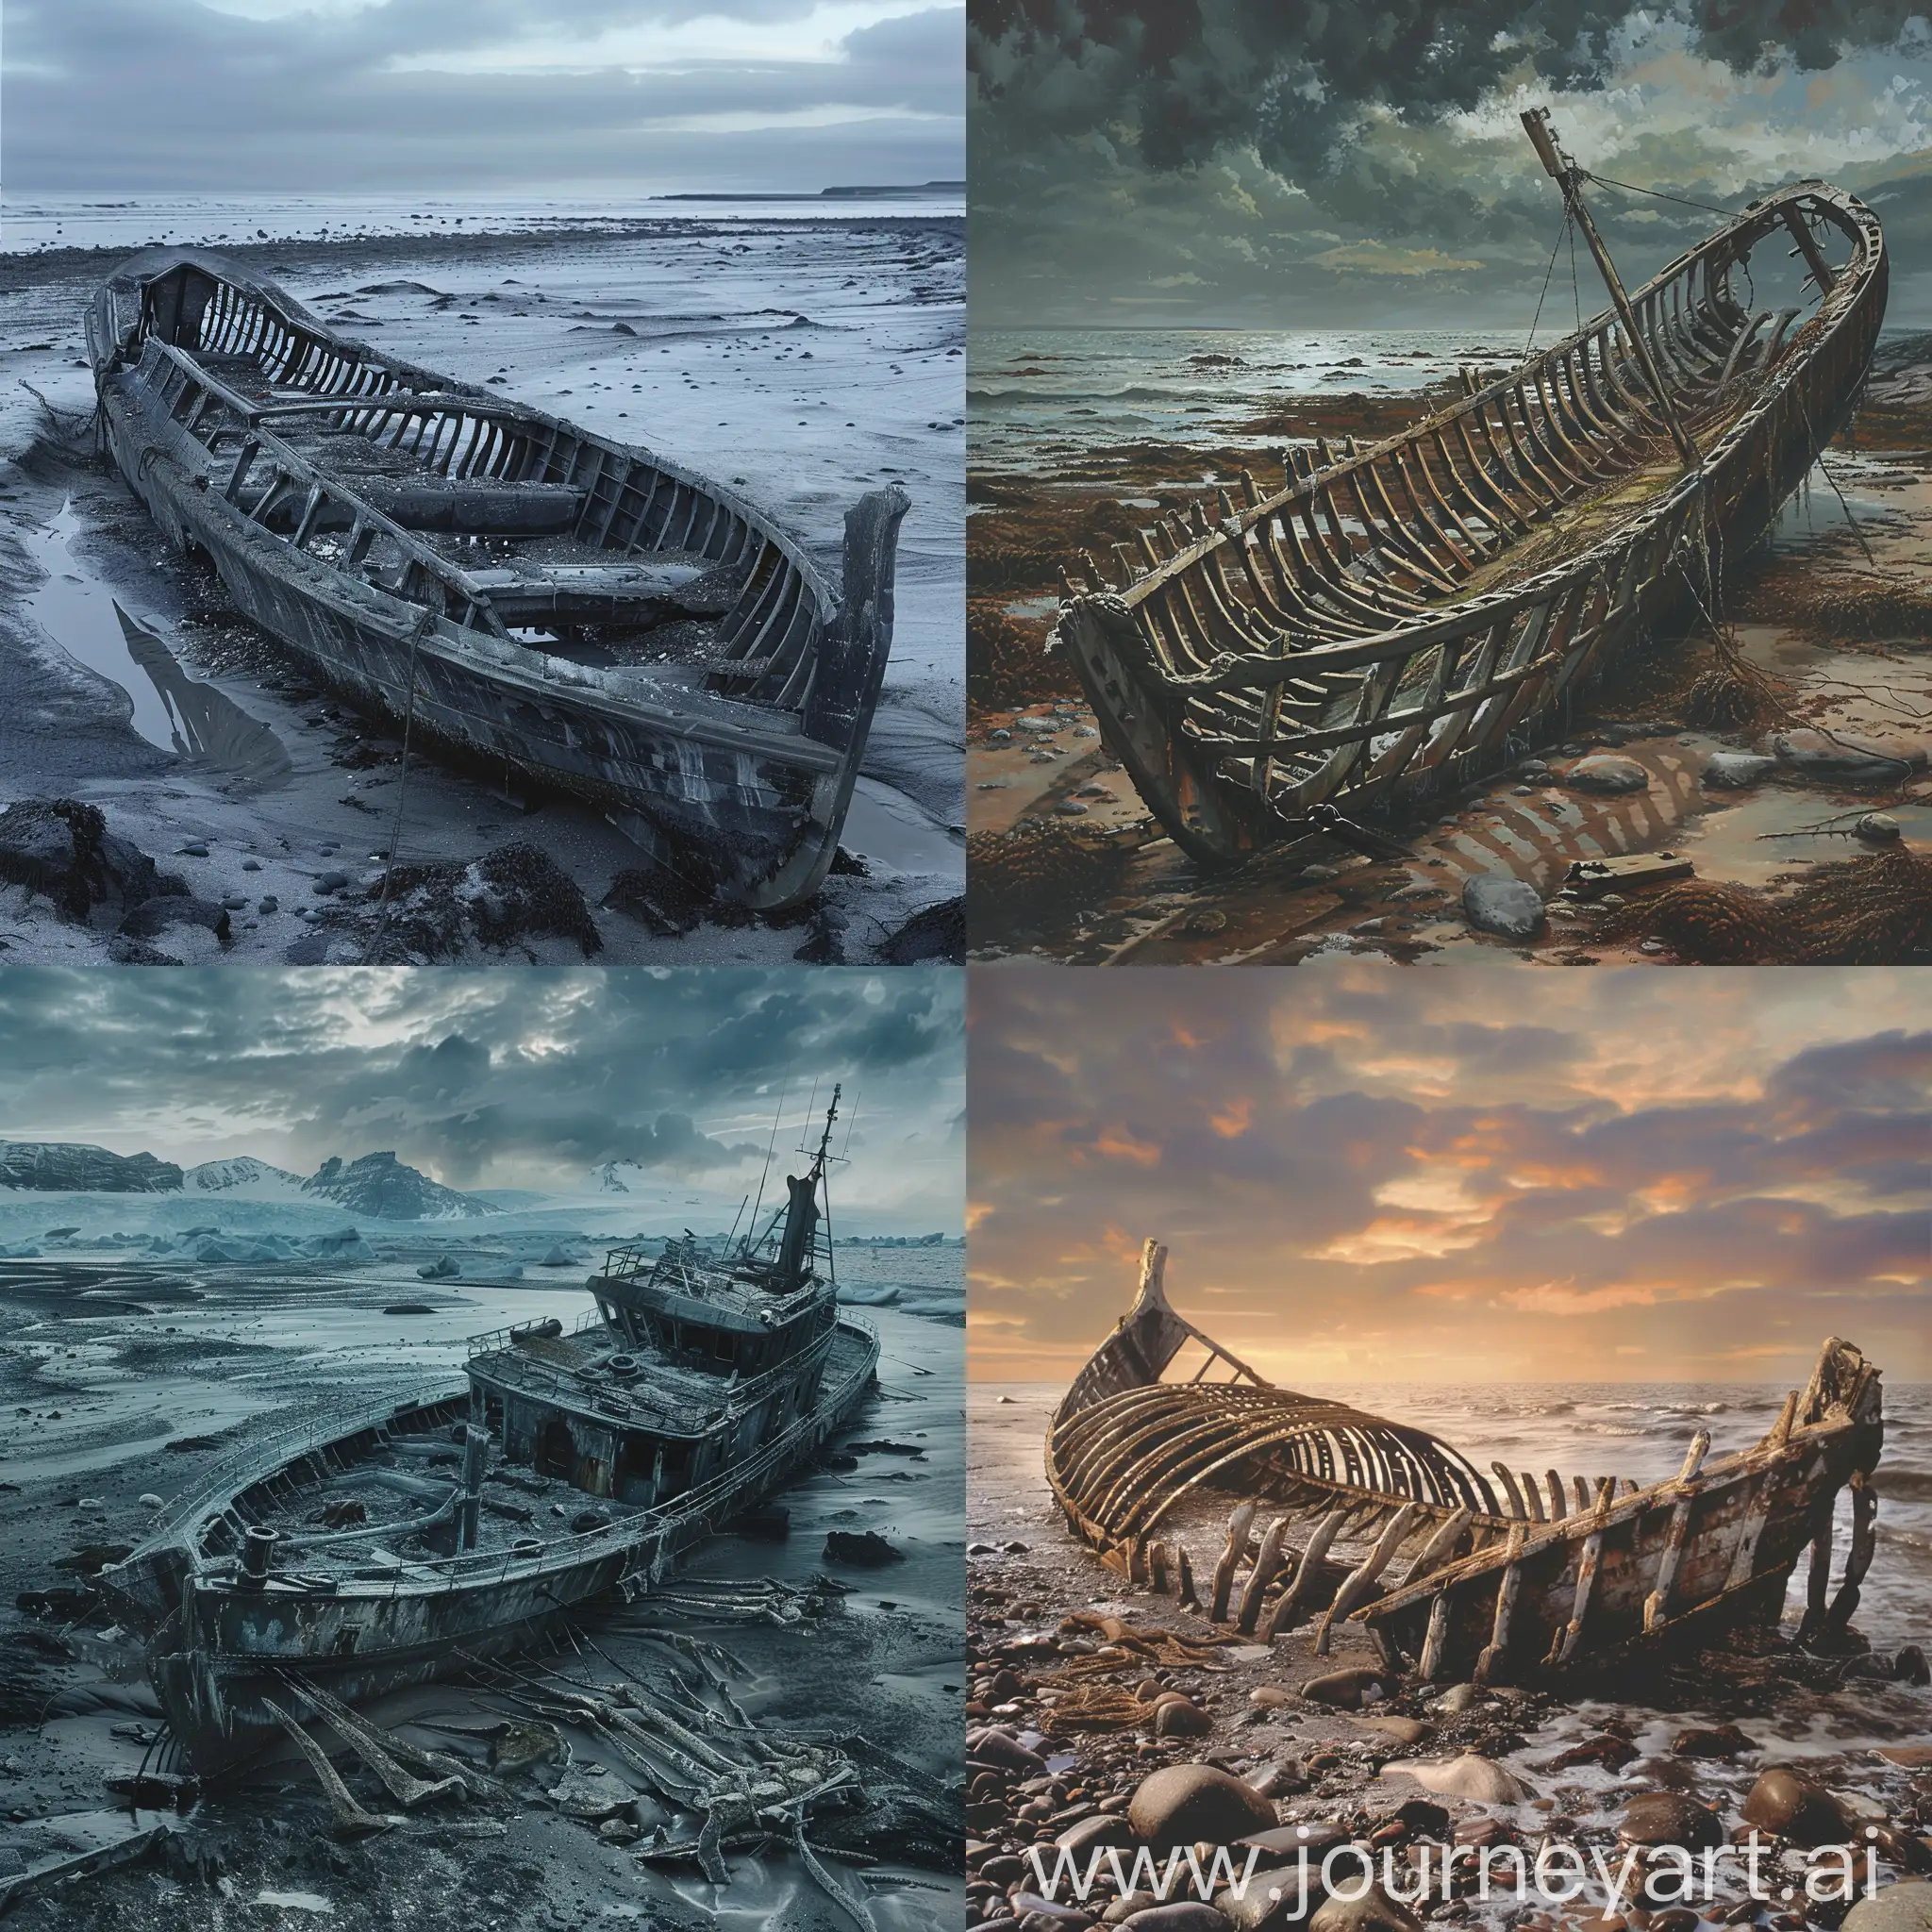 the cover for the book is the discarded skeleton of a fishing vessel on a deserted northern sea shore